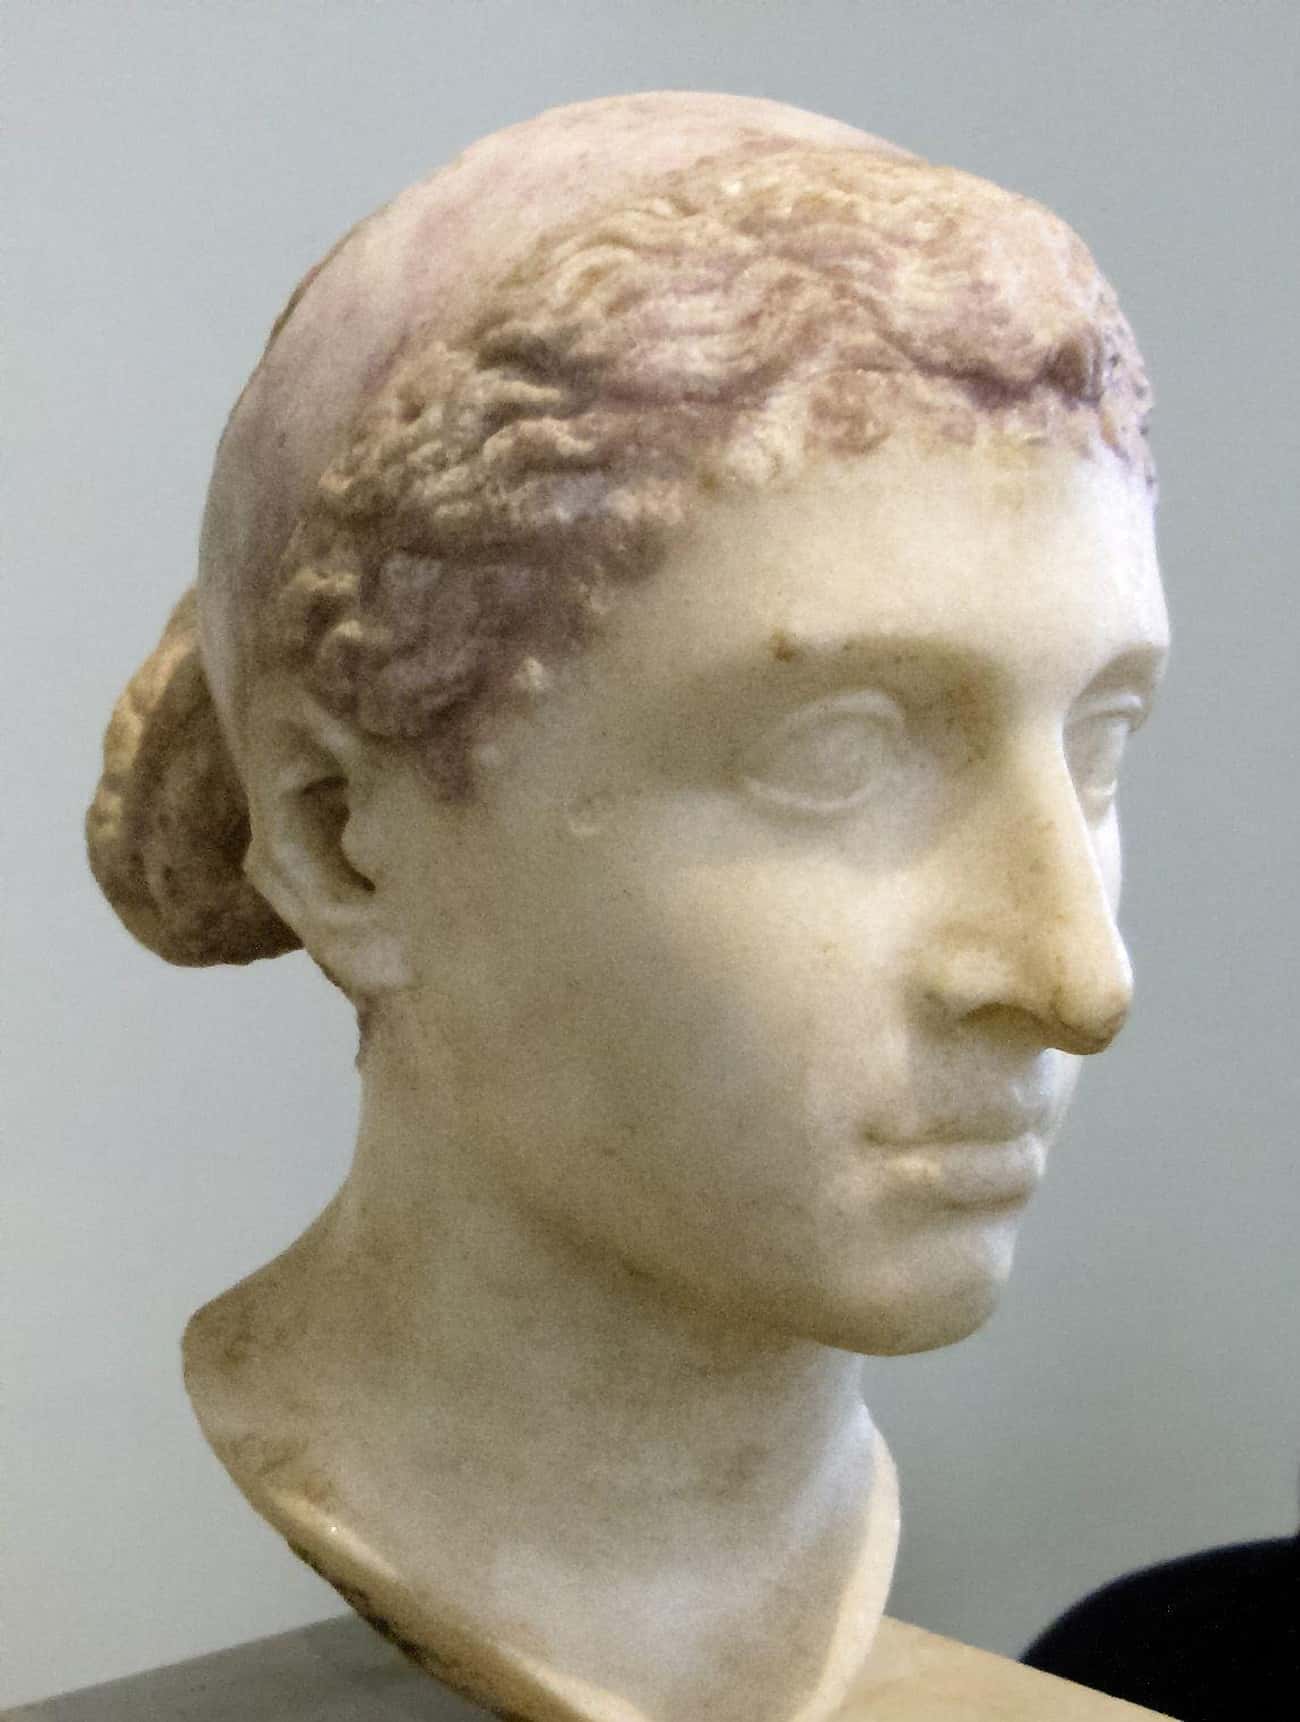 After Cleopatra VII Married Her Brother Ptolemy XIII, They Dragged Egypt Into A Civil War (And Their Sister Arsinoë IV Joined In)